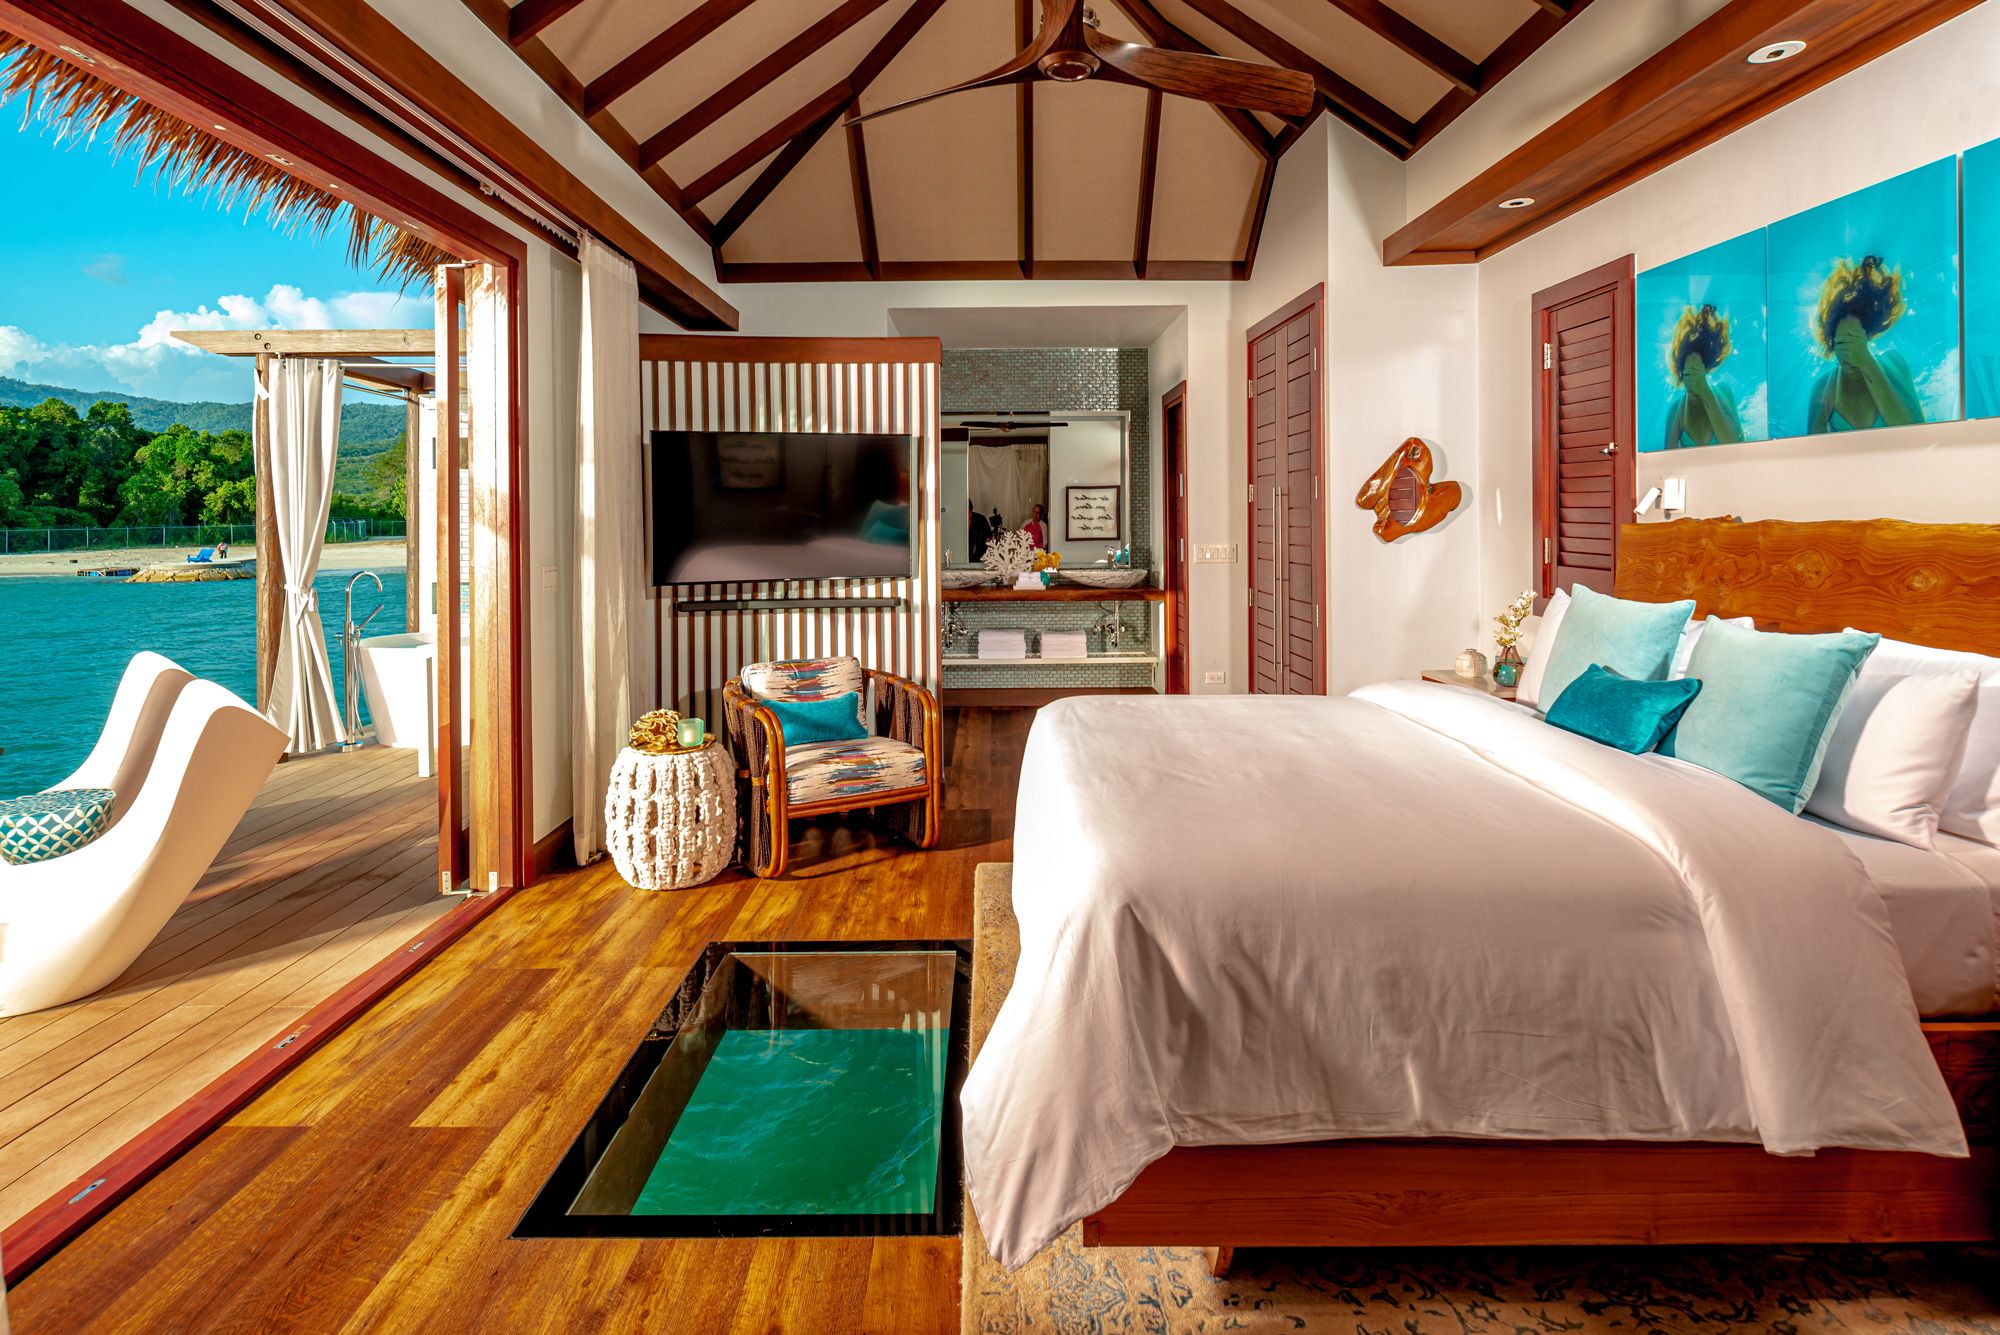 Sandals-South-Coast-Over-the-Water-Butler-Honeymoon-Bungalow